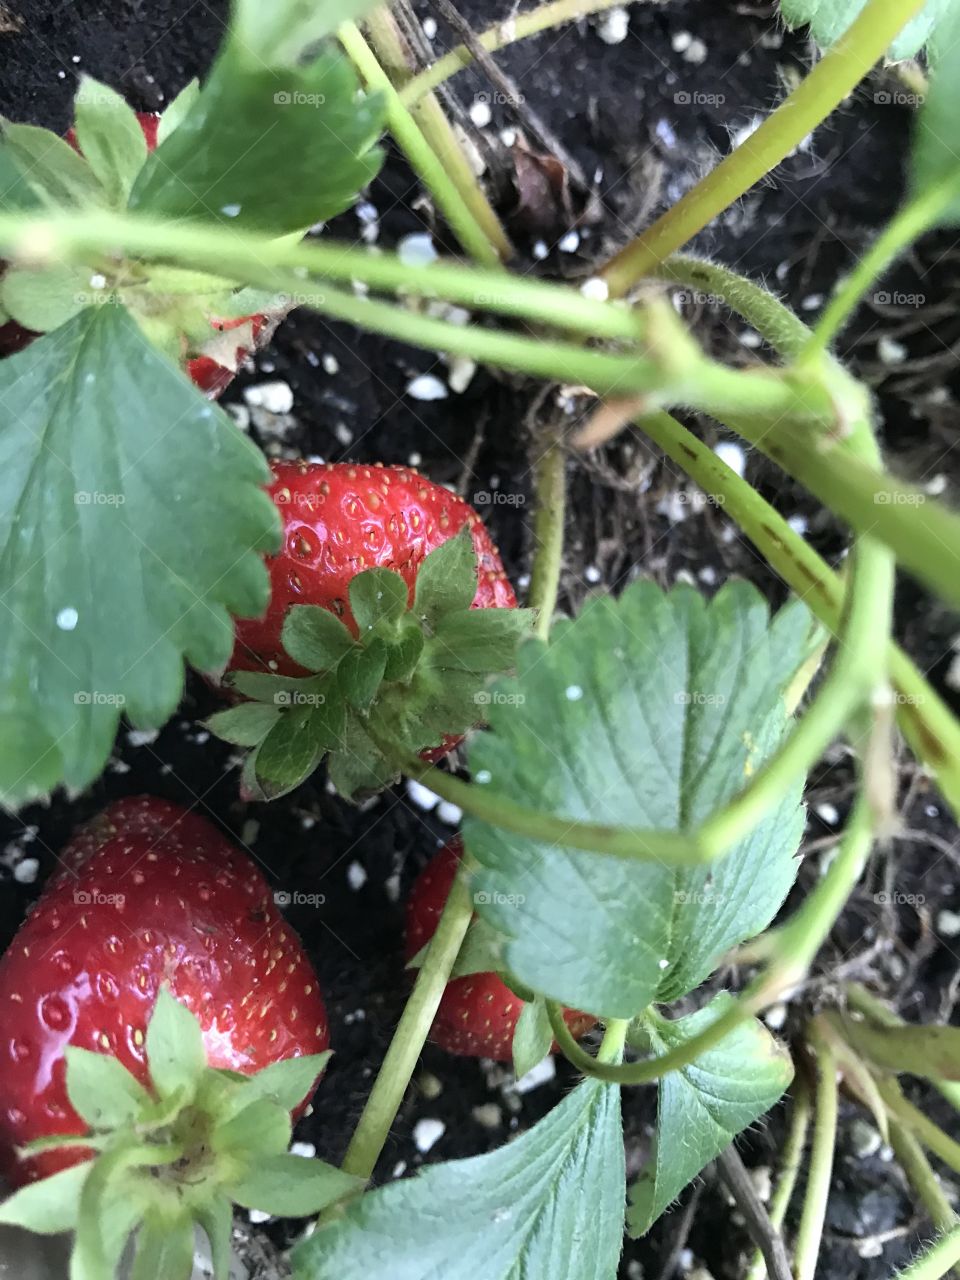 Strawberry plant in bloom